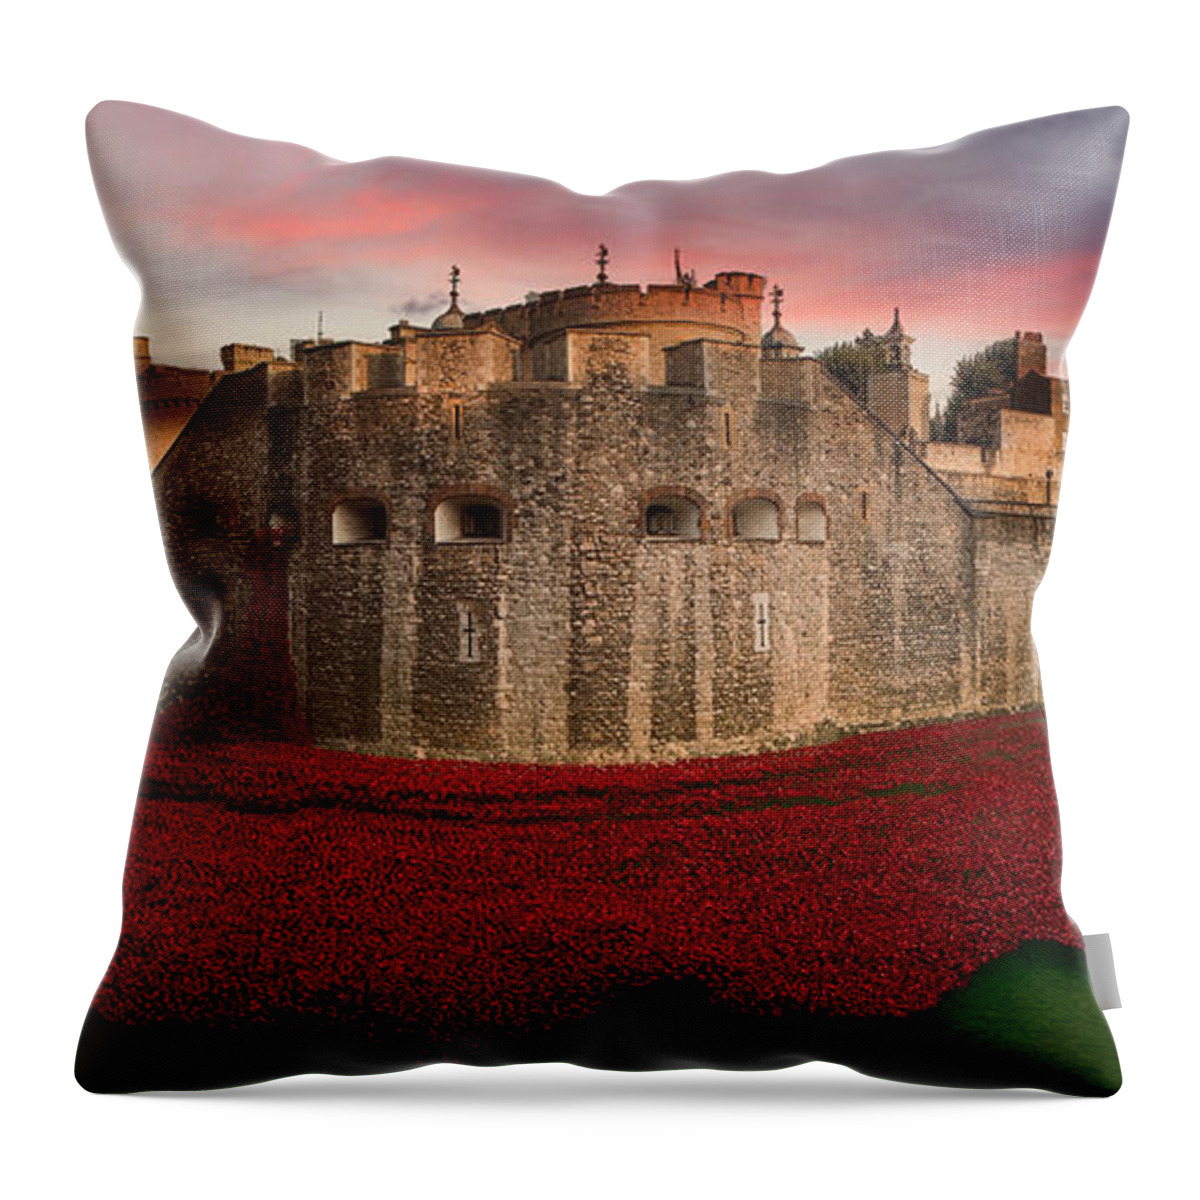 Poppies Throw Pillow featuring the digital art Poppy Sea by Airpower Art